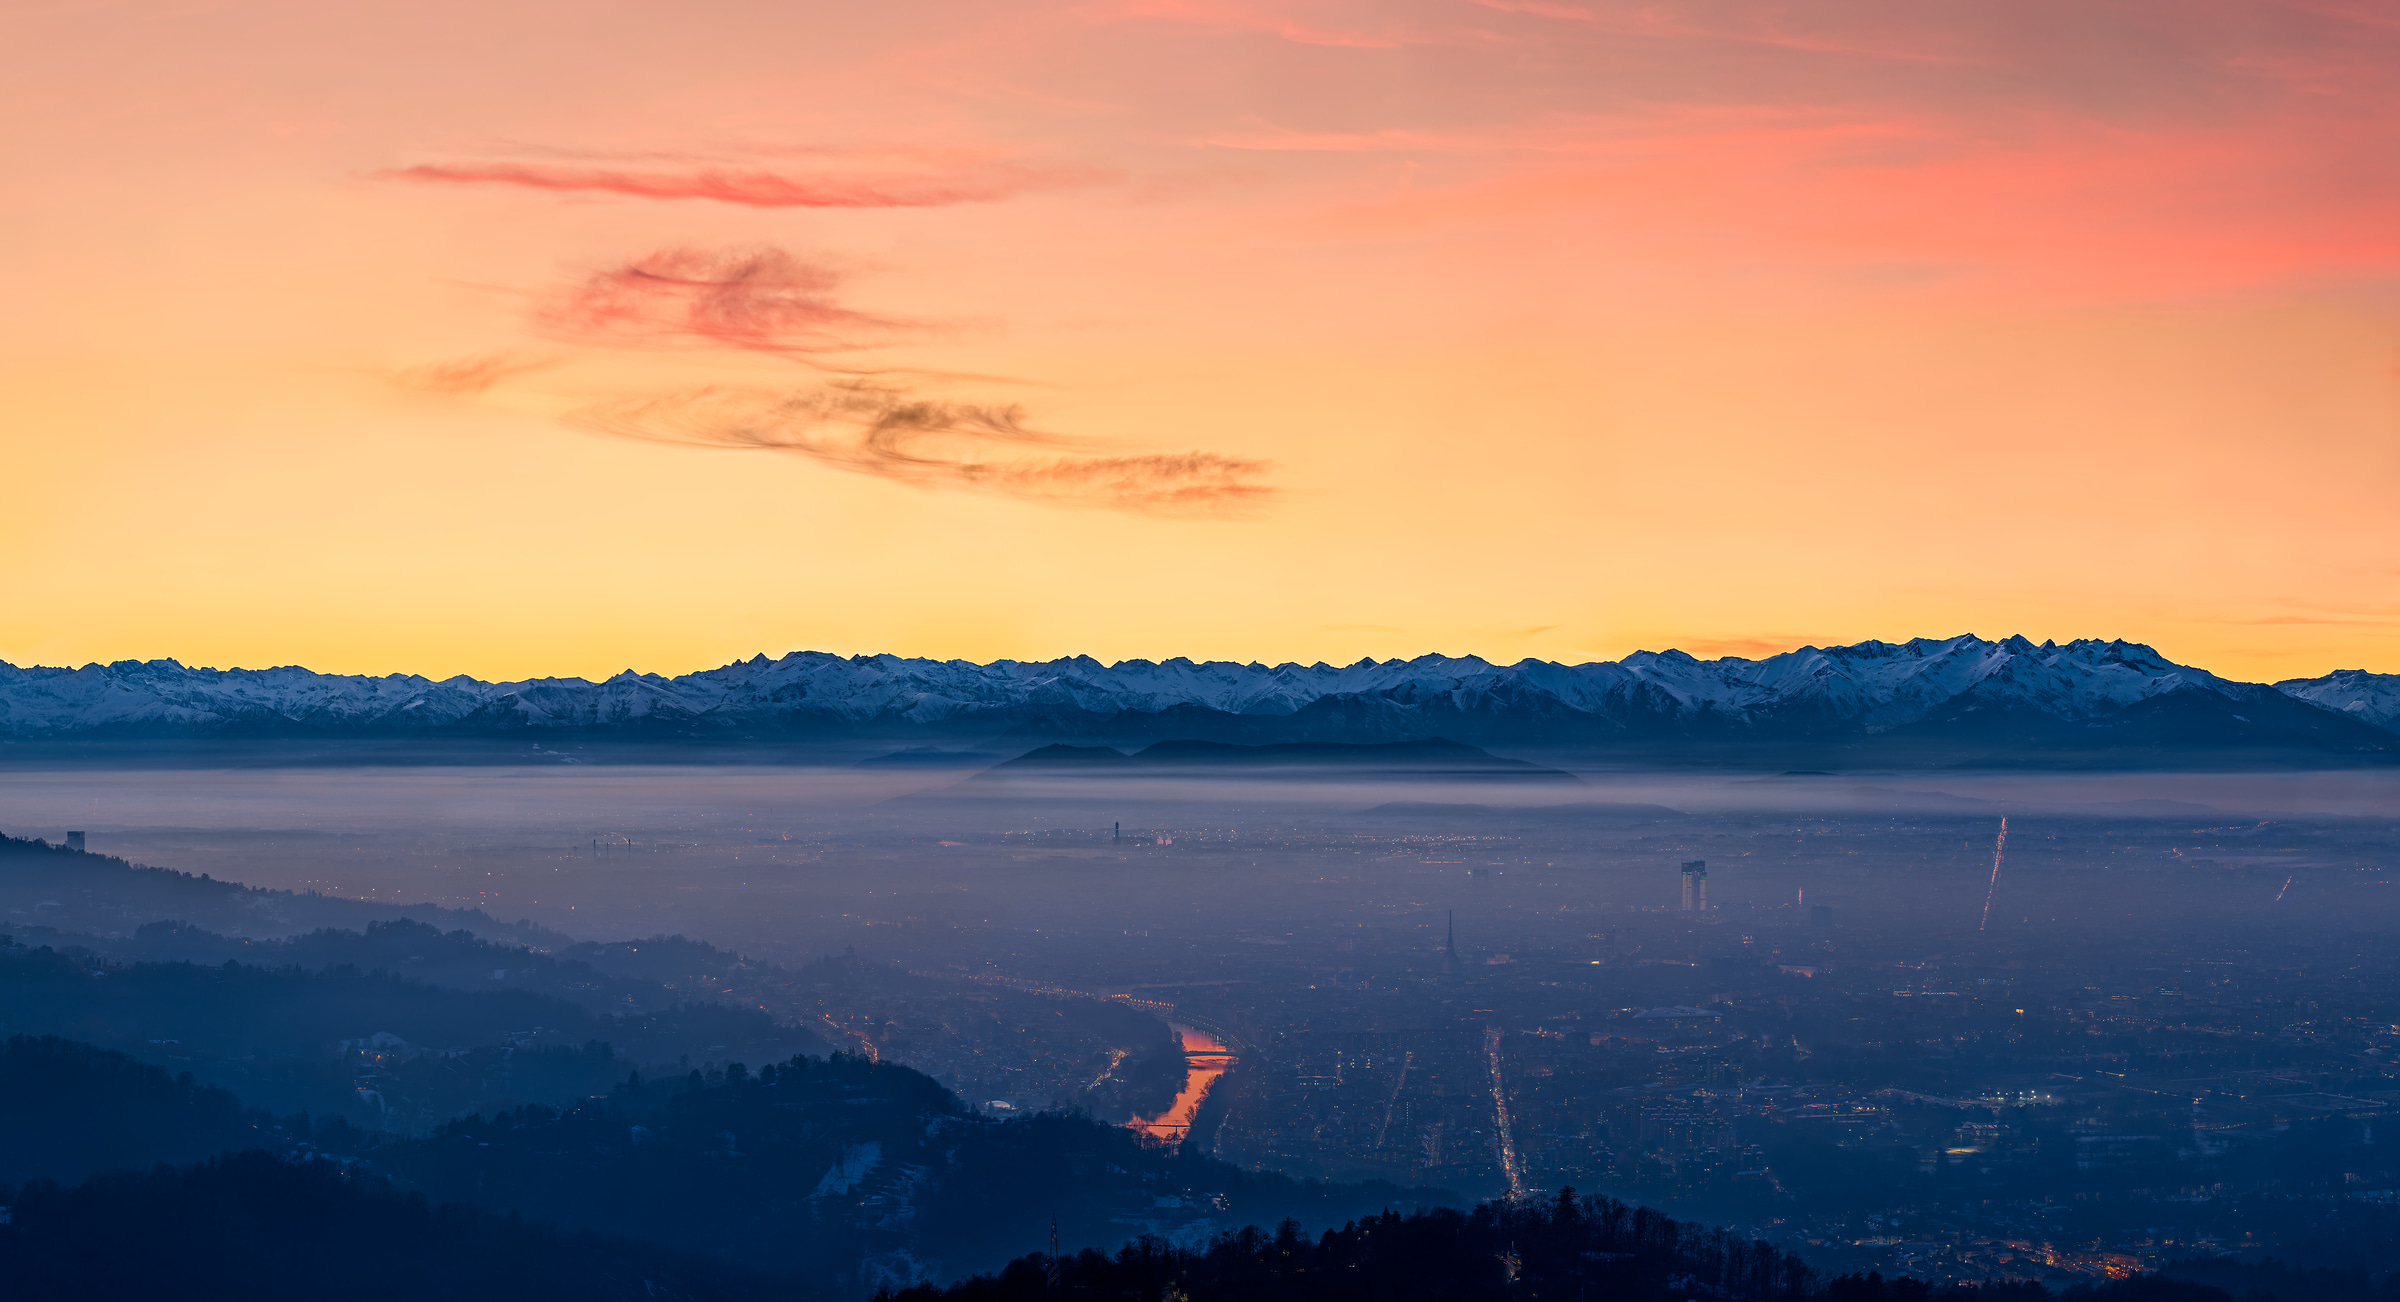 1,613 megapixels! A very high resolution, large-format VAST photo print of the Turin, Italy cityscape at sunset with the Alps mountains in the background; landscape photograph created by Duilio Fiorille in Turin, Italy